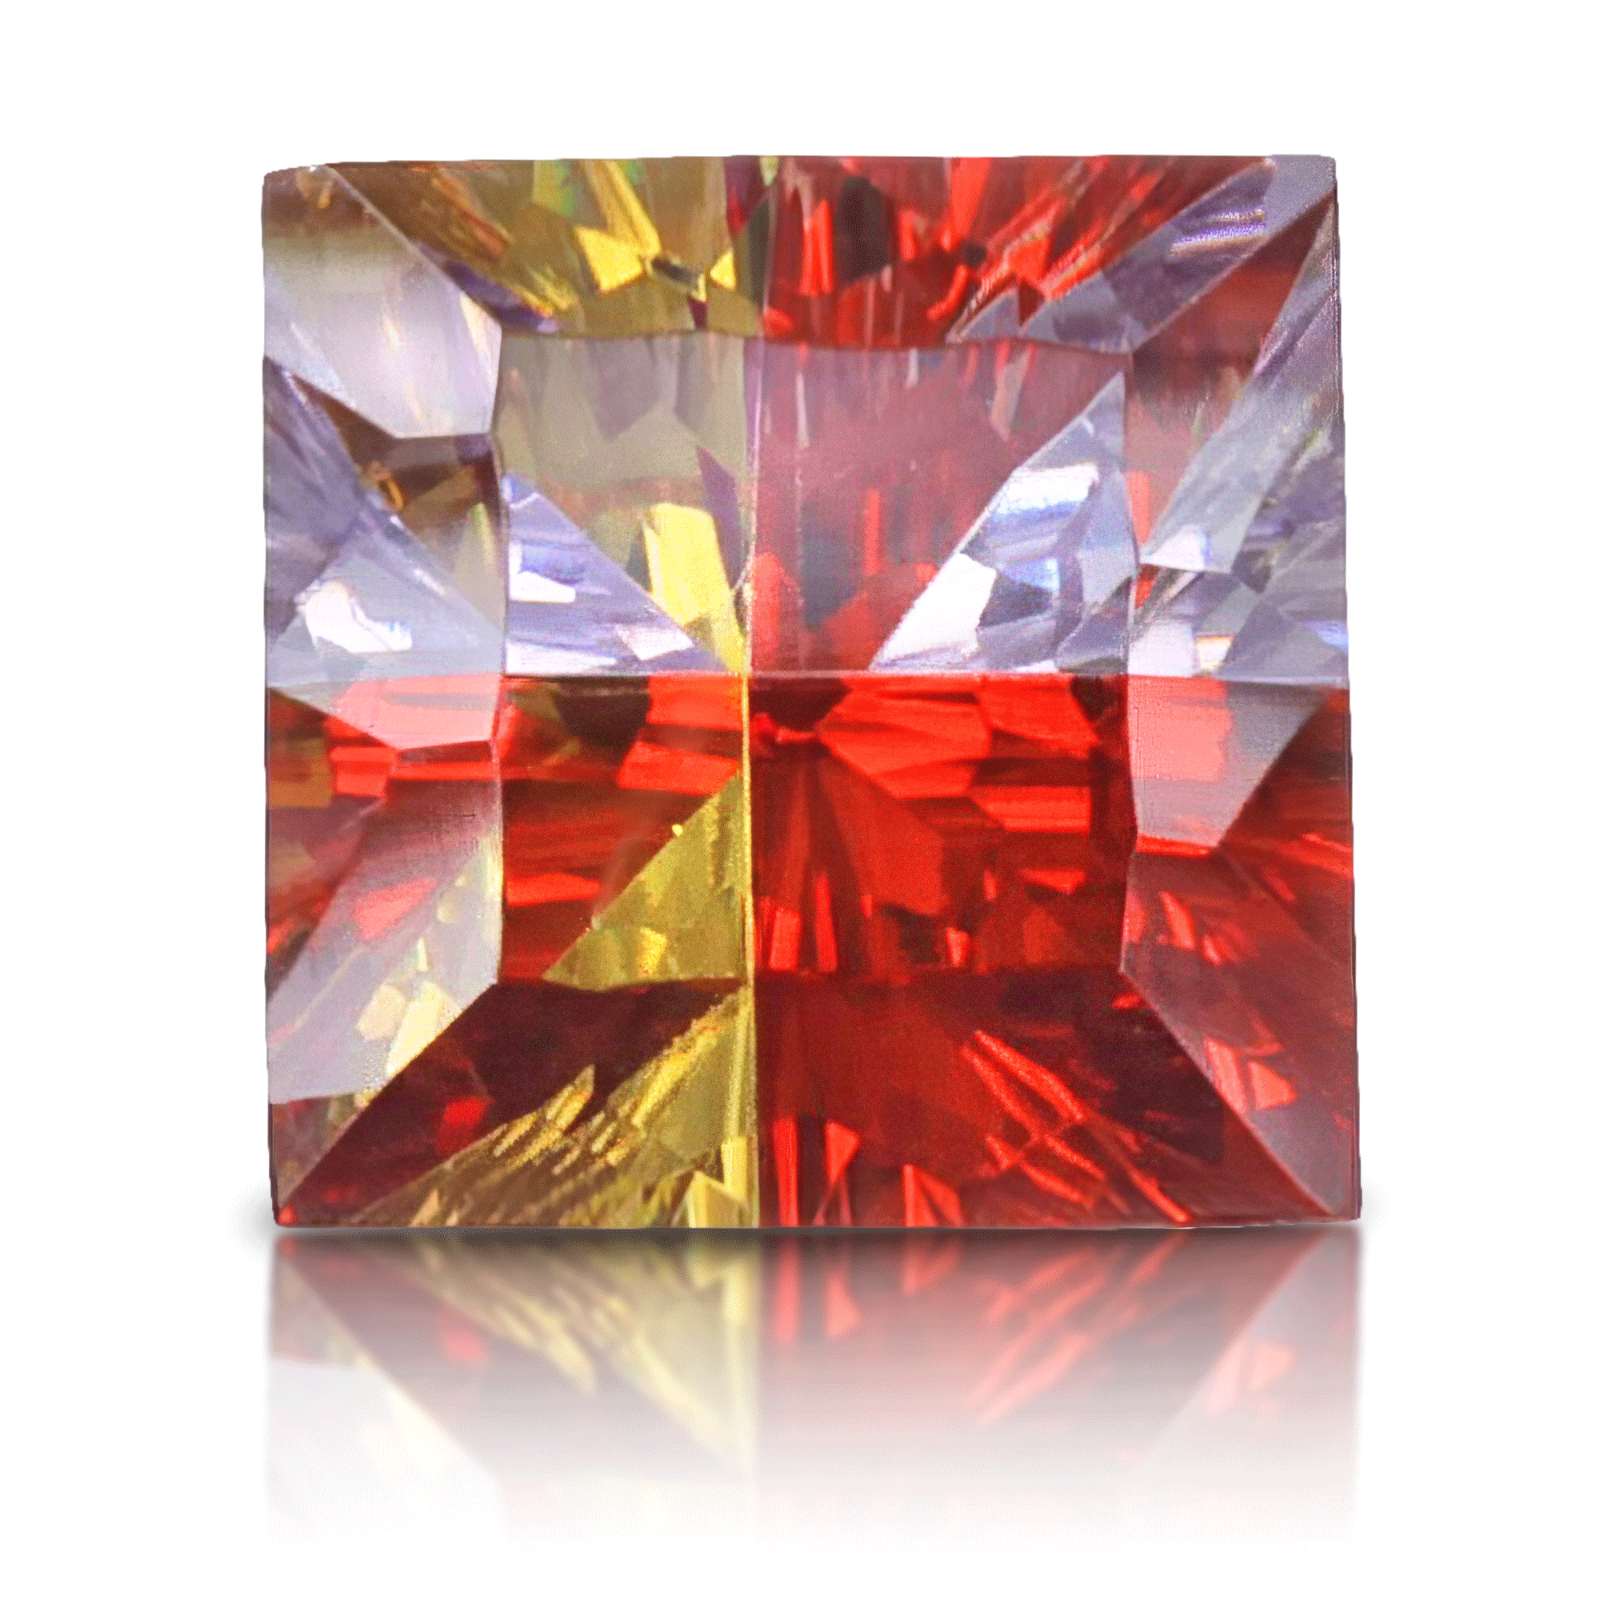 Cubic Zirconia 8mm Tri-Color Square Princess Cut for Jewelry Making